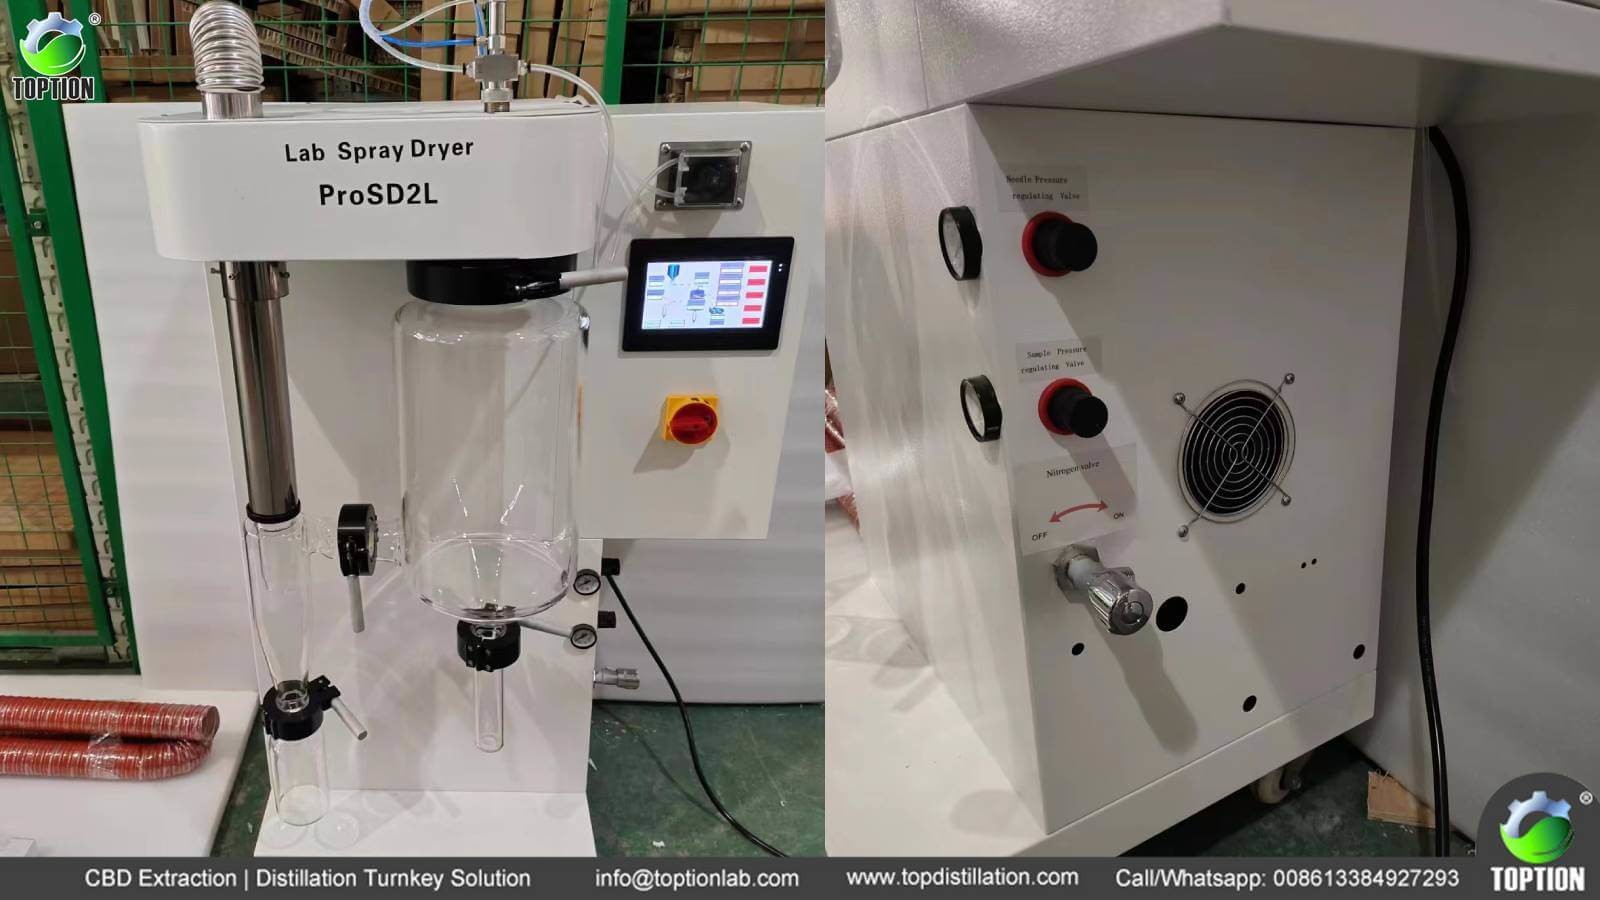 latest company news about Laboratory 2L Spray Dryer Completed Shipment  0